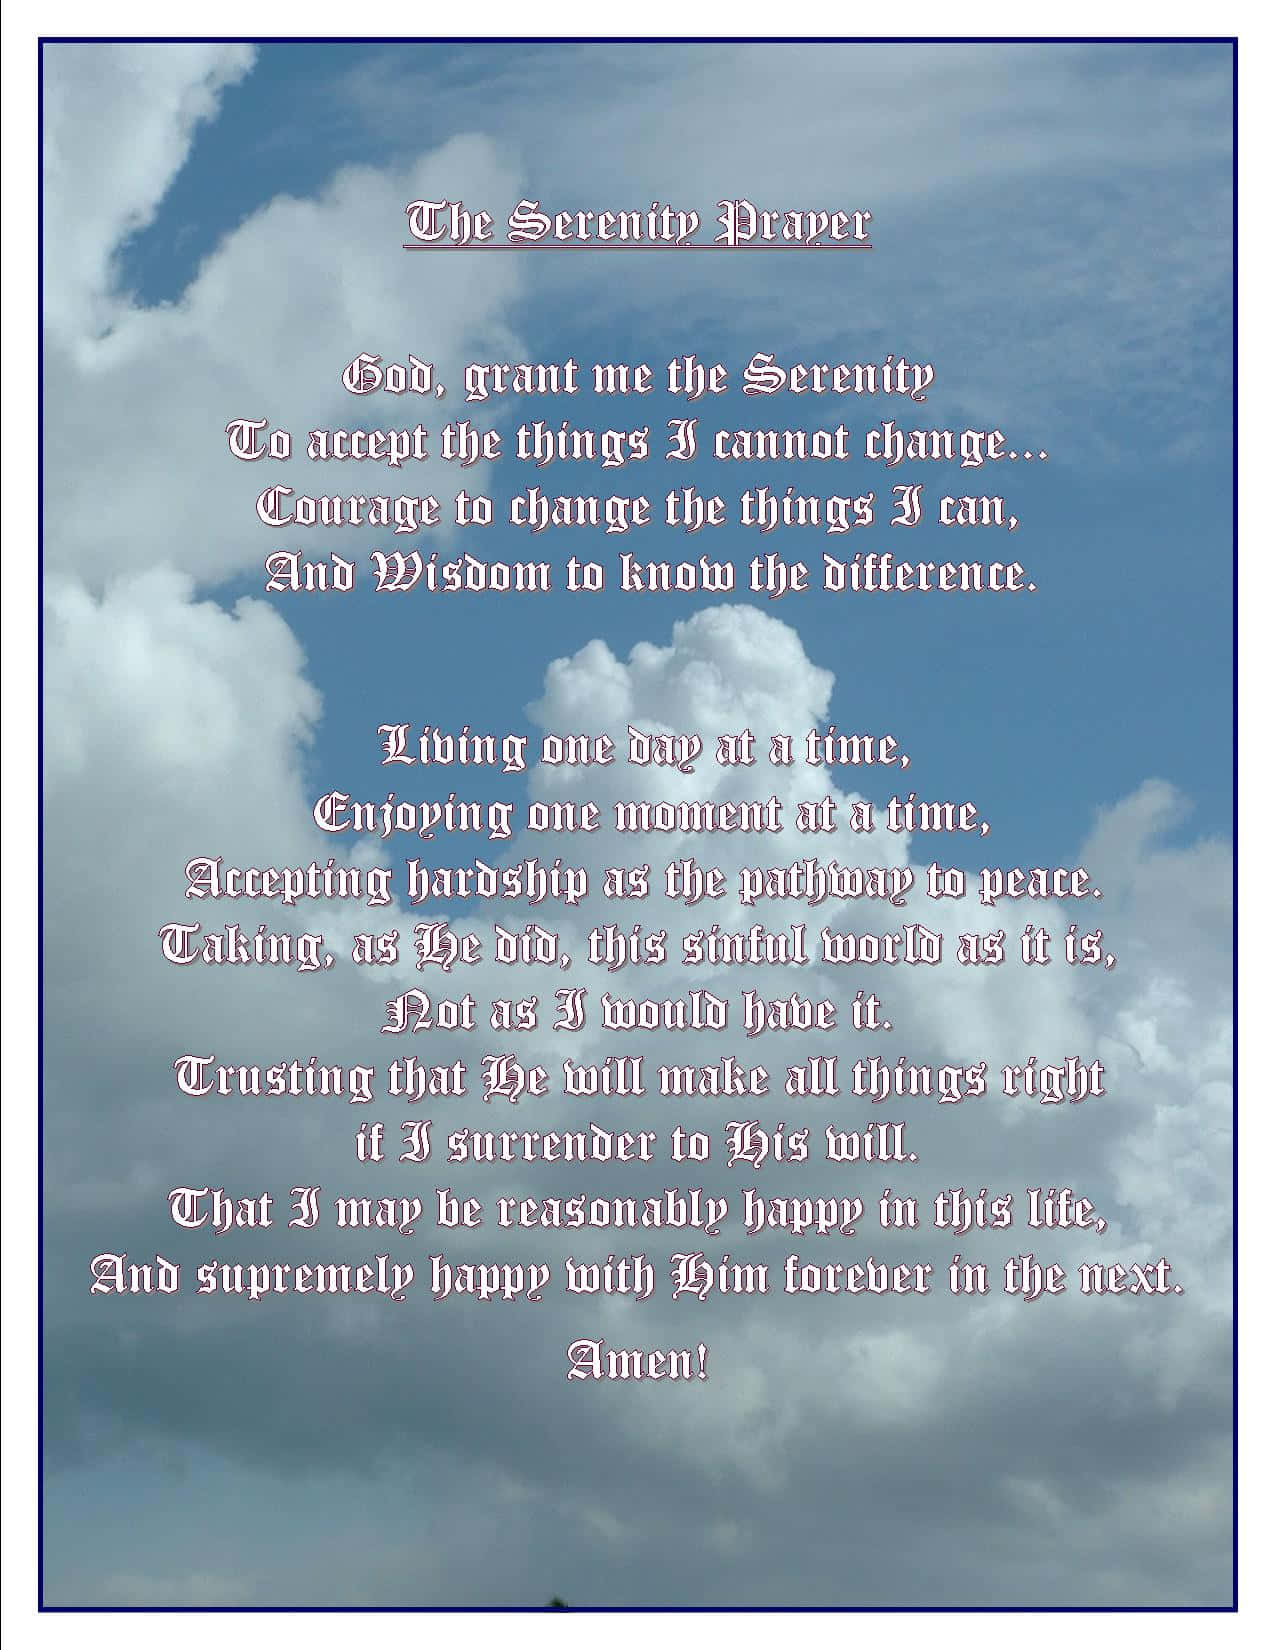 Clouds With The Blue Skies Serenity Prayer Wallpaper